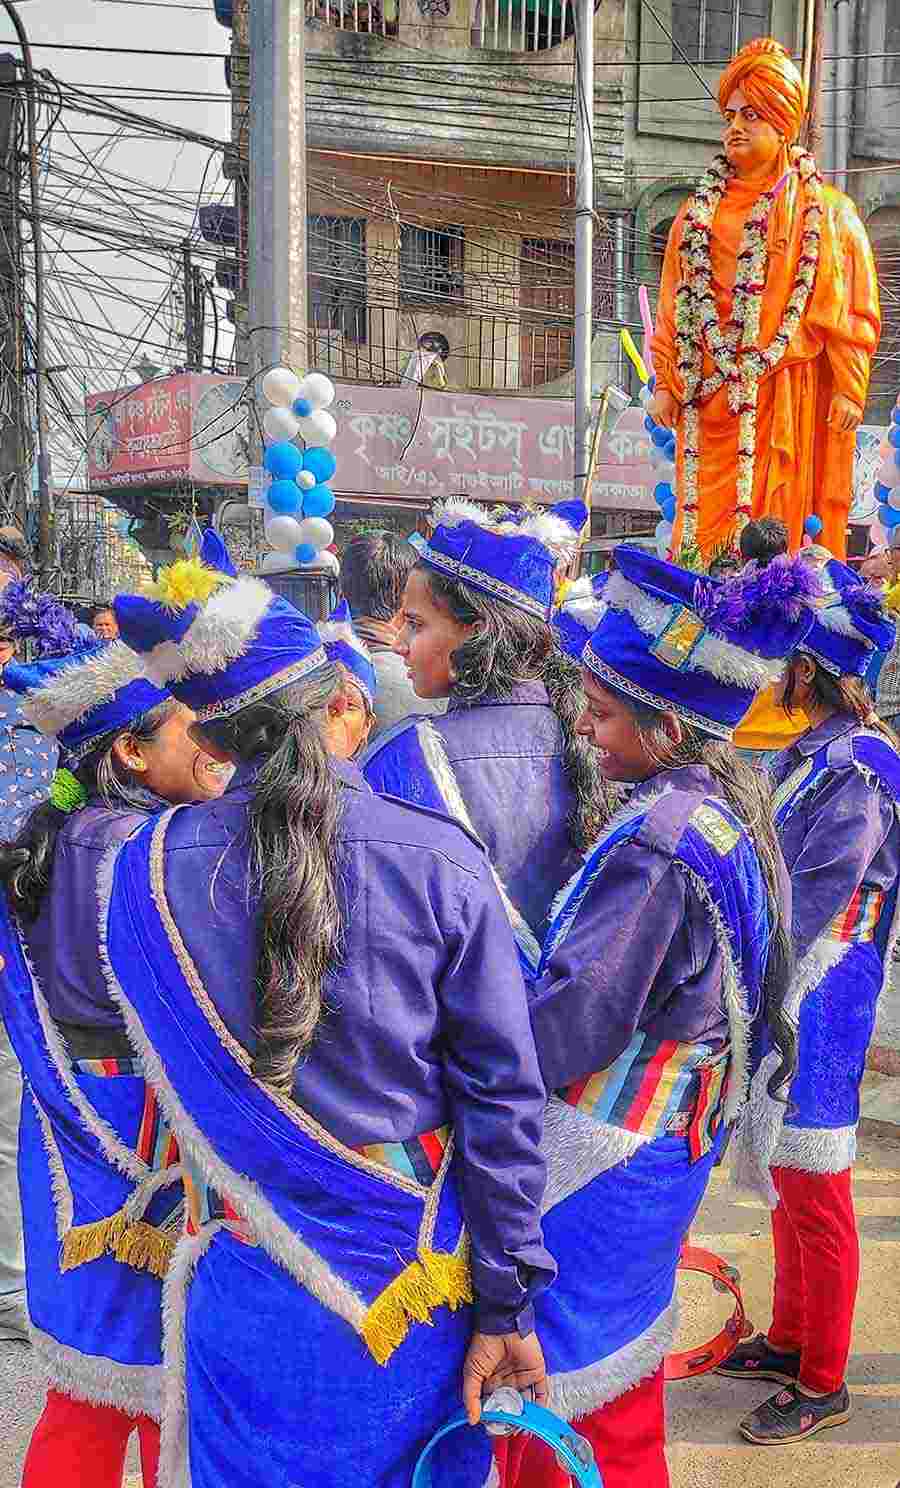 Girls of a musical band huddle together in front of a statue of Swami Vivekananda